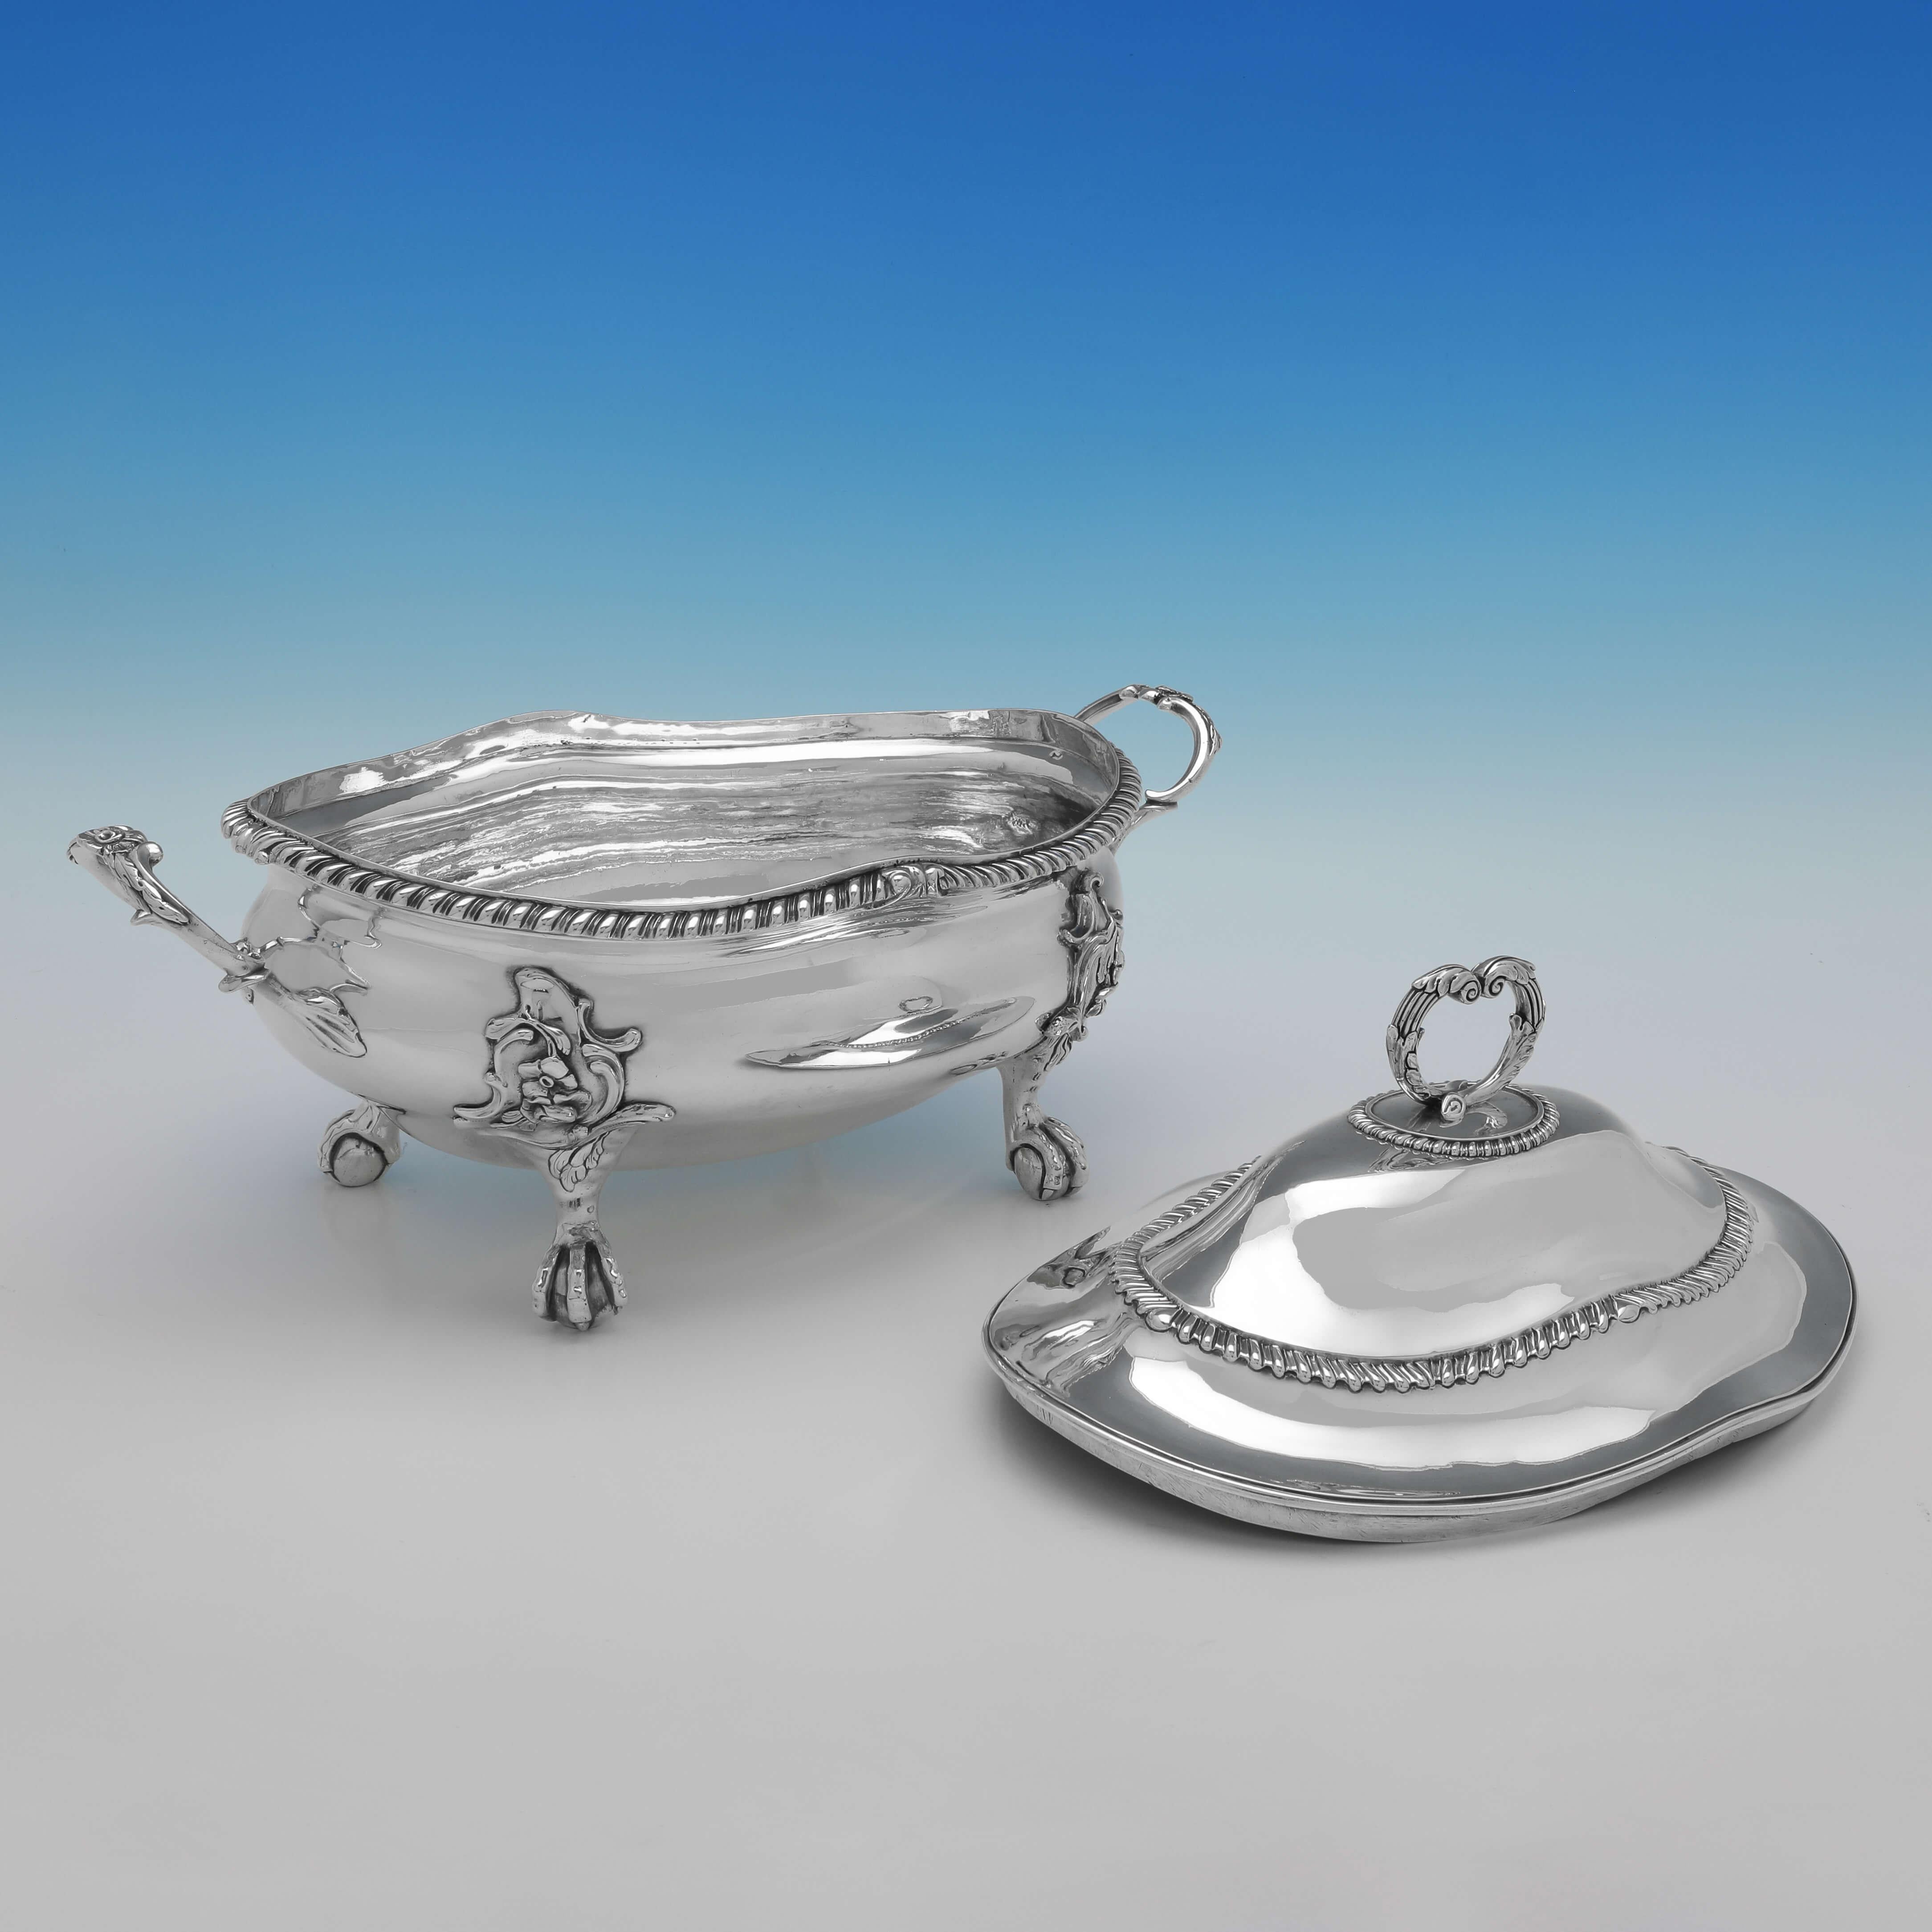 English Rococo George III Sterling Silver Soup Tureen, Herne & Butty, London, 1766 For Sale